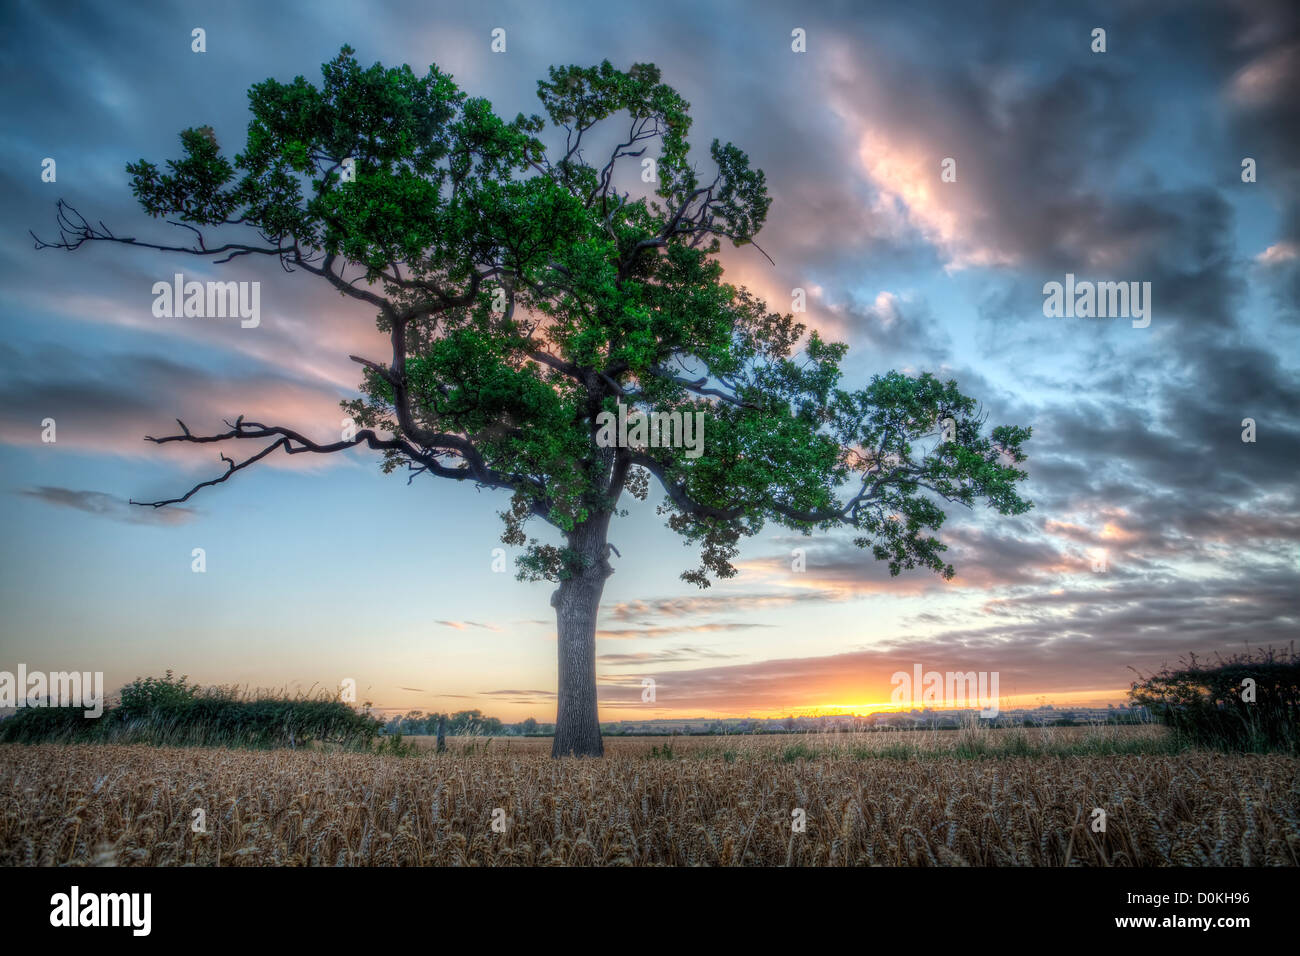 A view towards a lone tree at sunrise. Stock Photo